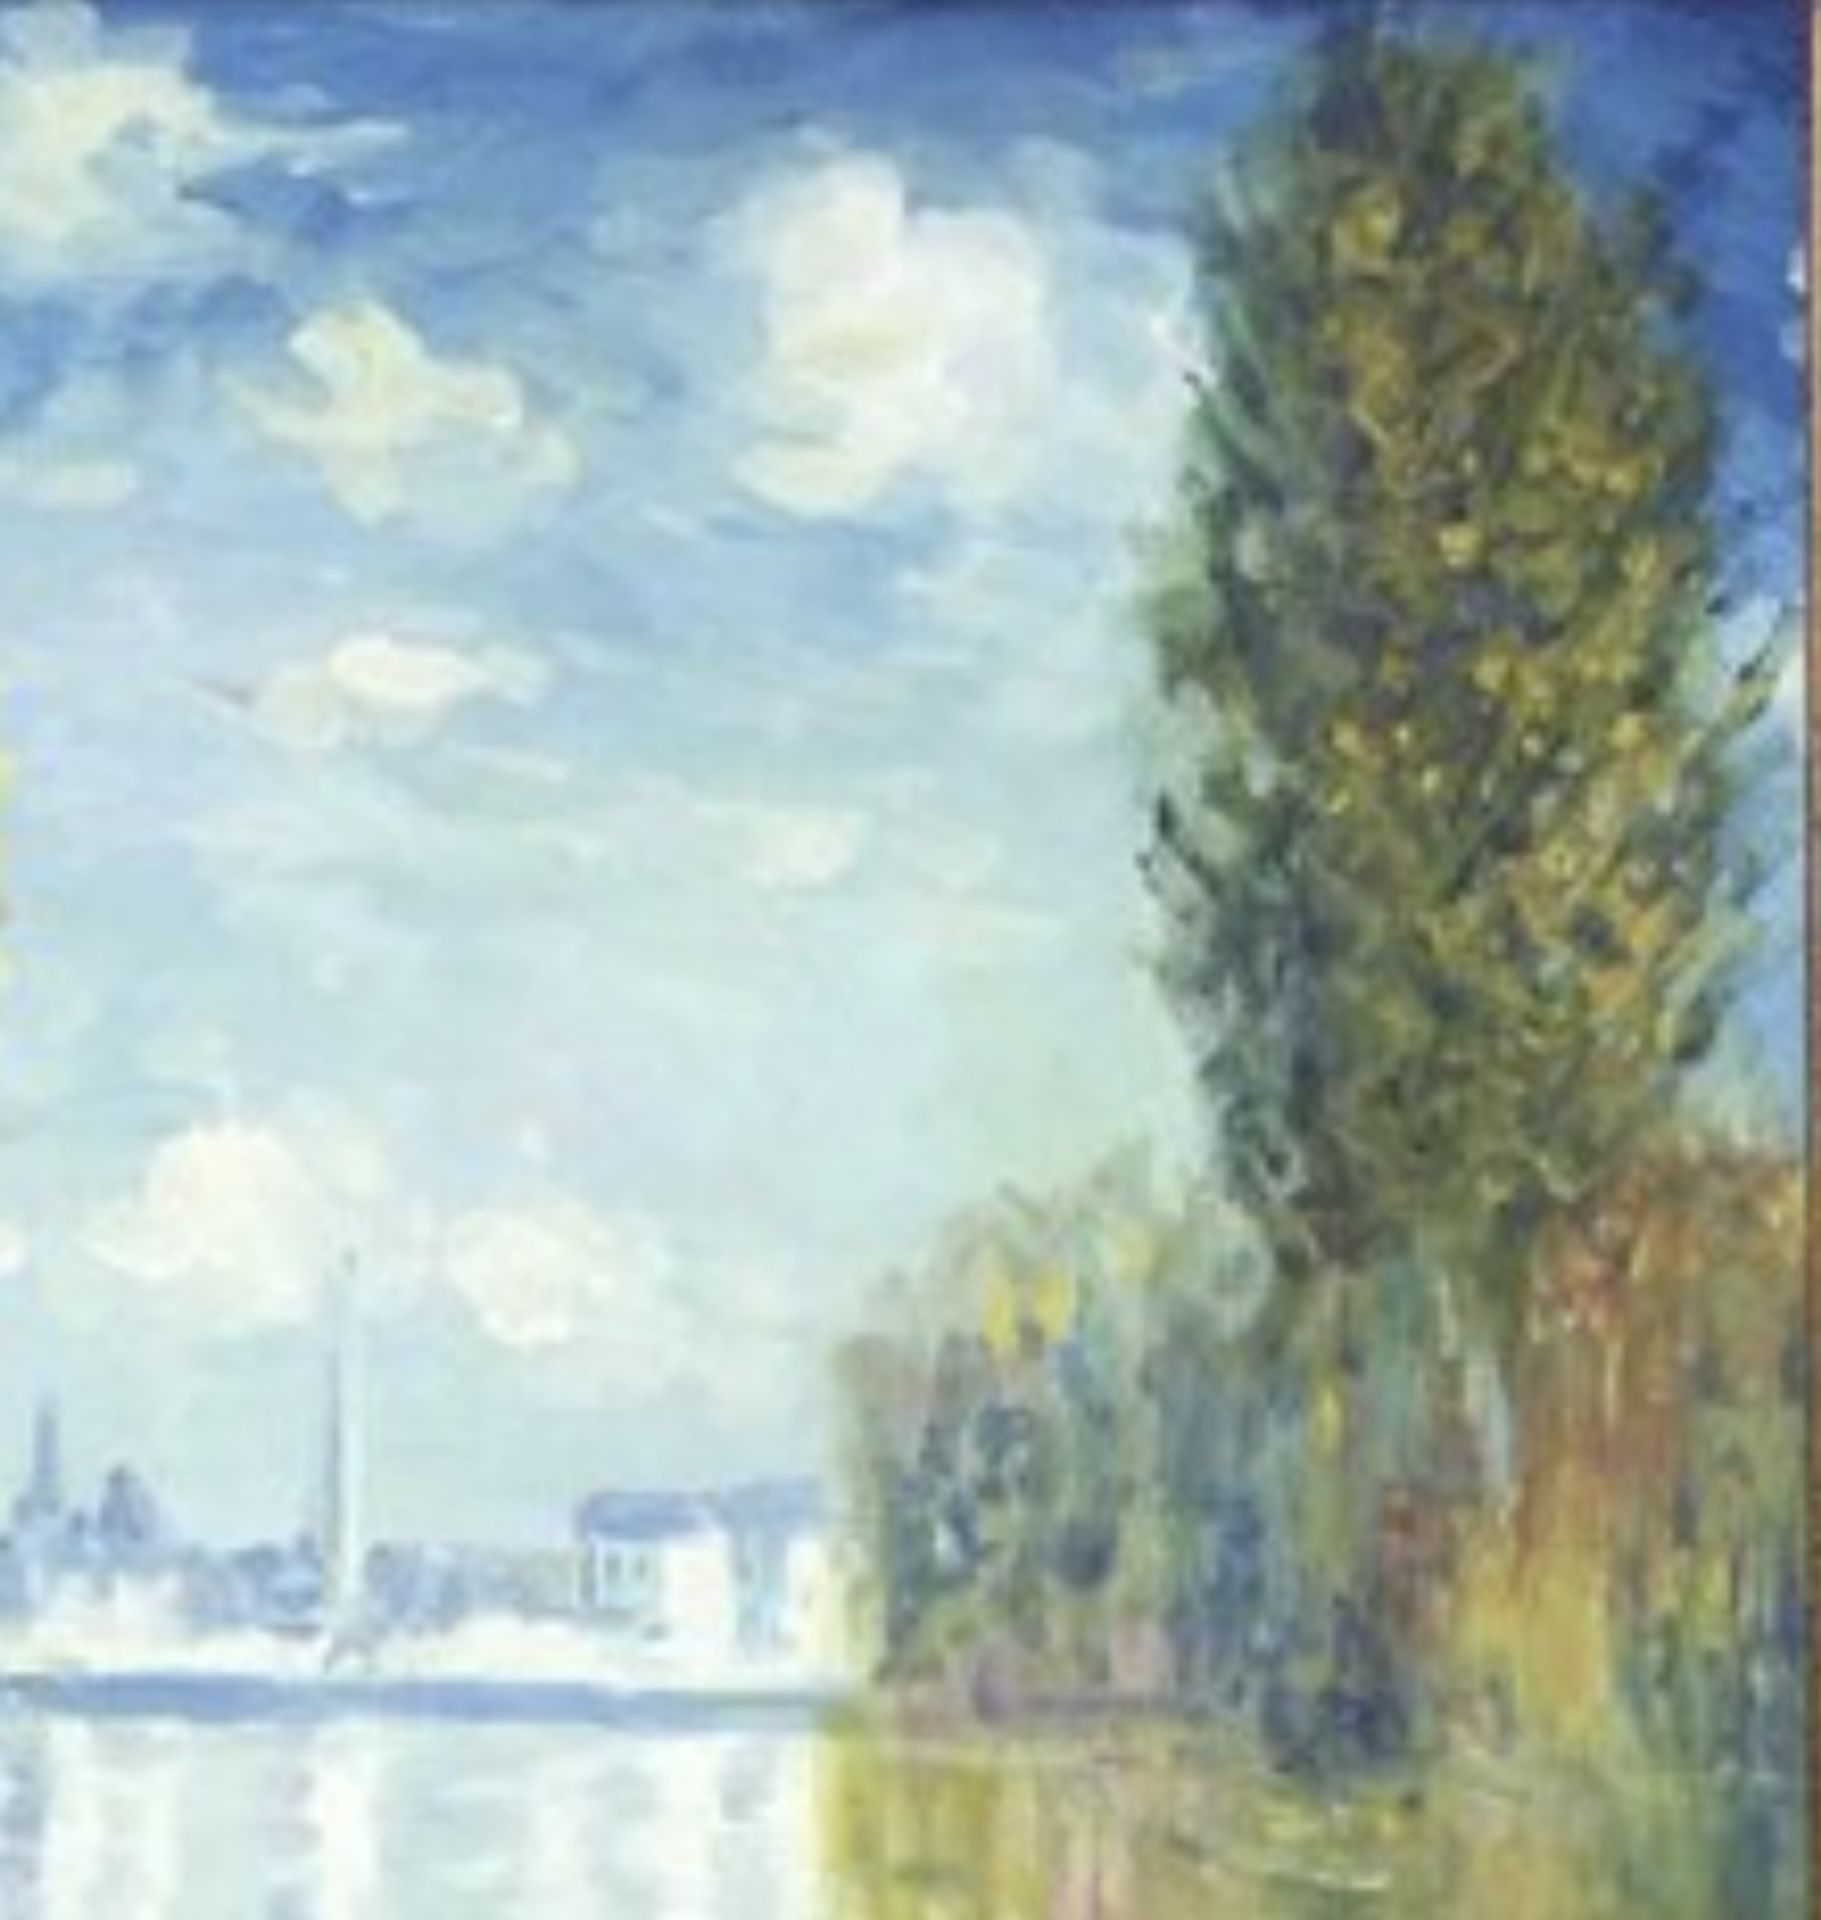 Claude Monet "Autumn at Argenteuil, 1873" Oil Painting, After - Image 4 of 6